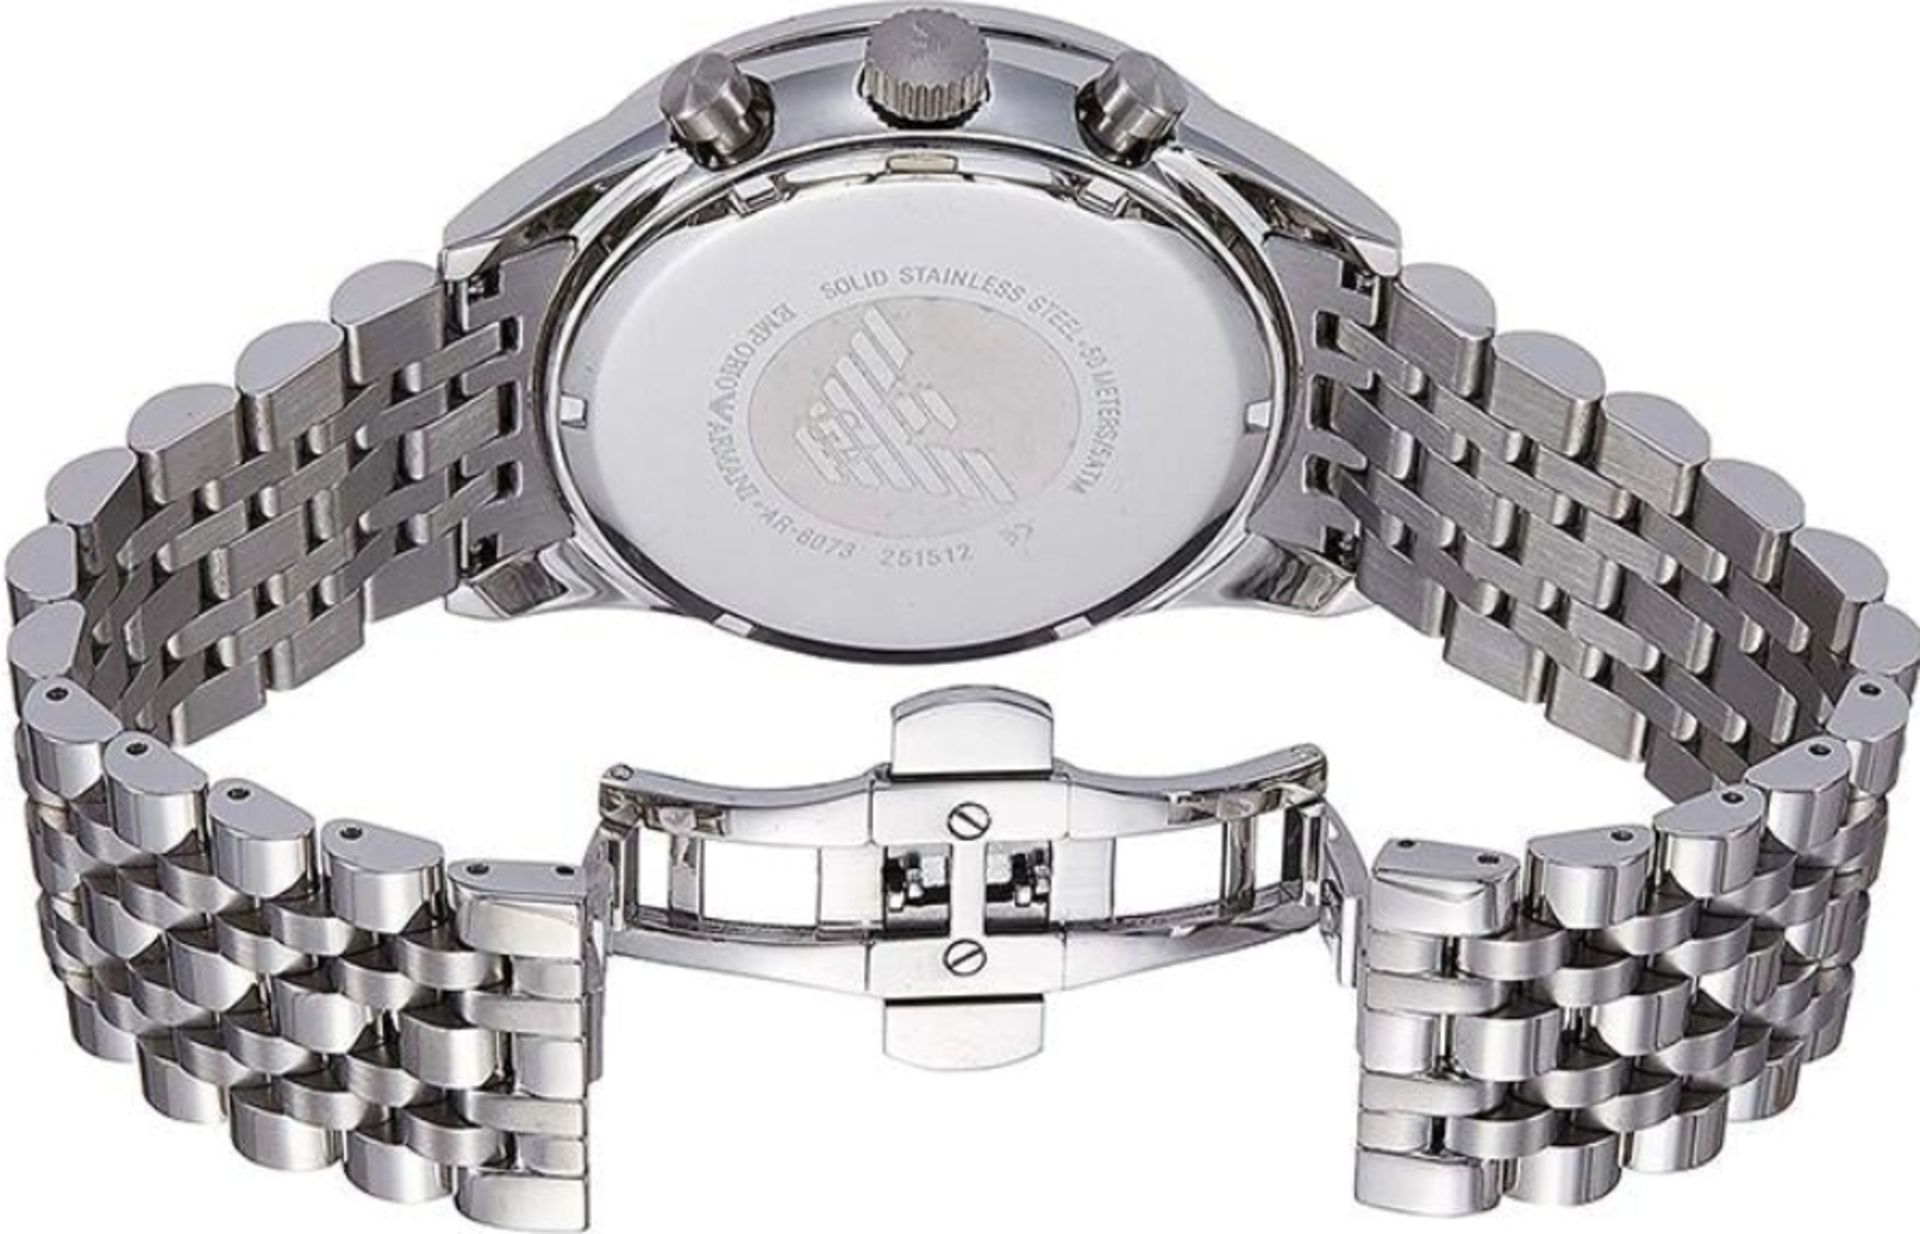 AR6073 Emporio Armani Men's Sportivo Silver Stainless Steel Chronograph Watch - Image 5 of 8